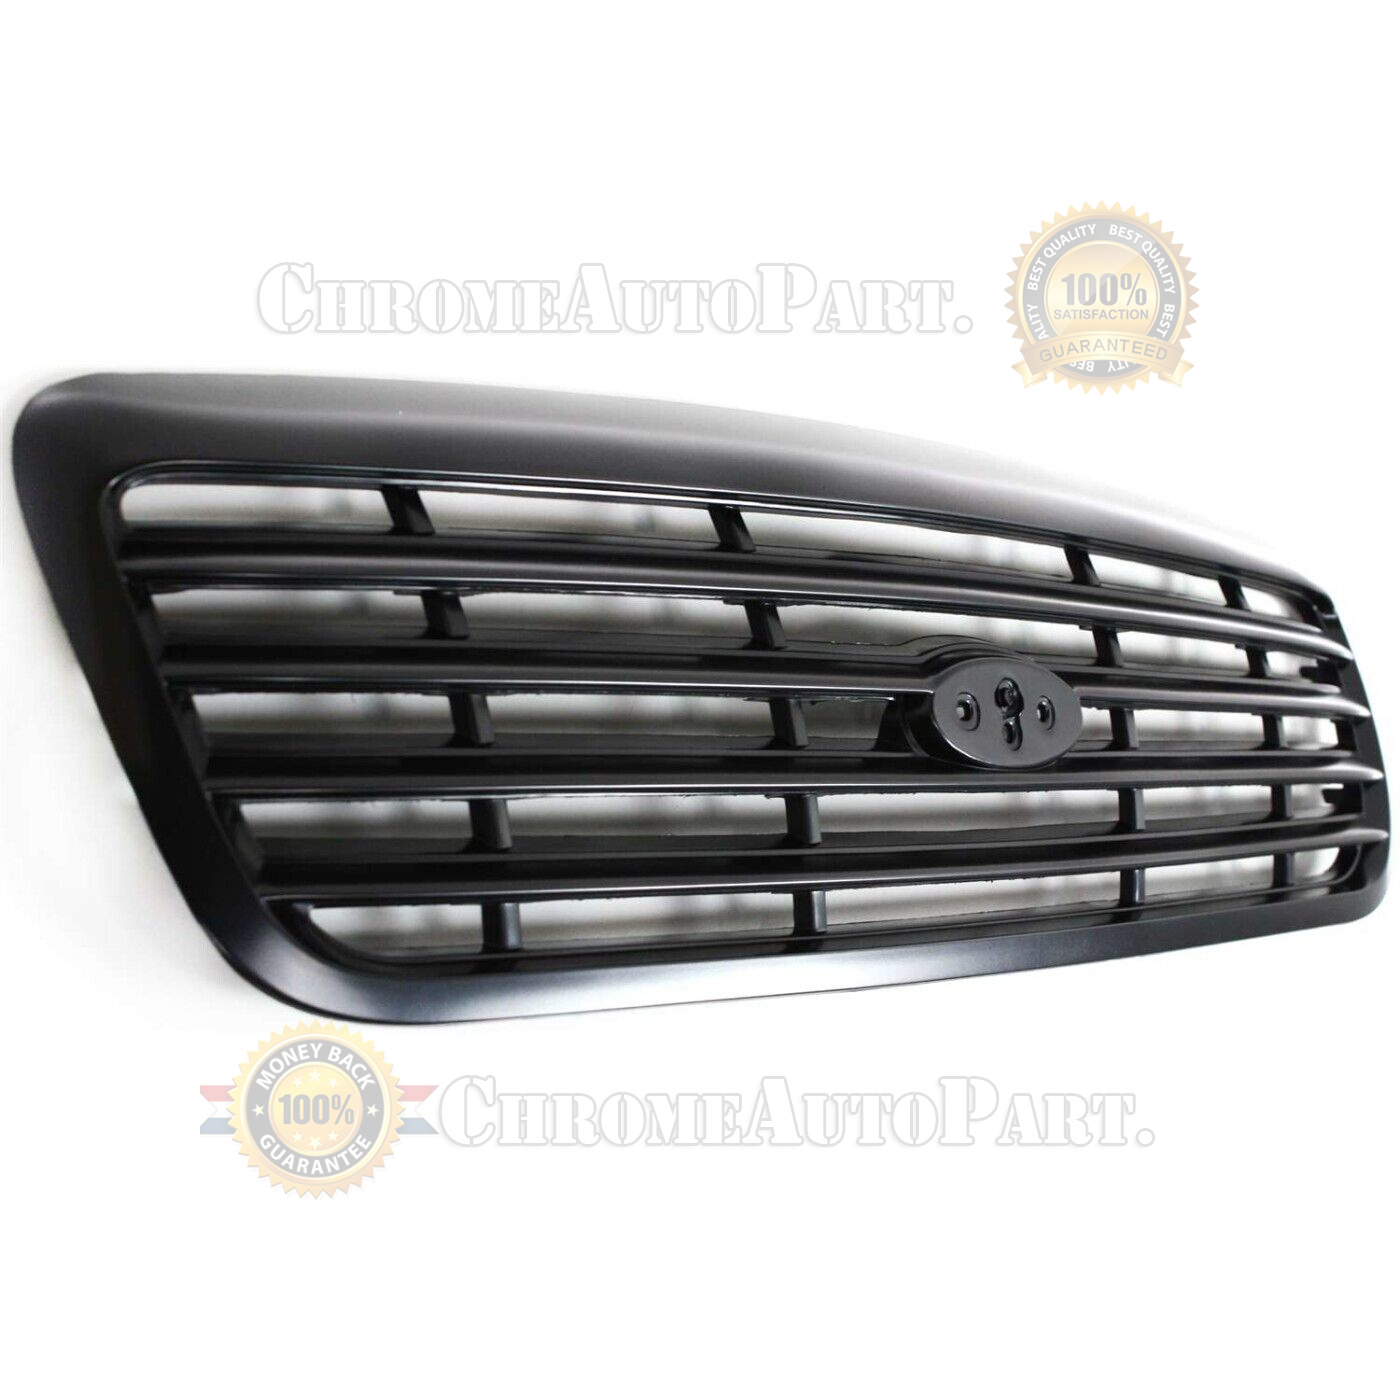 Ford Part 6A-20011. Fender And Grille Trim Clips - 47-48 Pass Fender, 42-47  Pickup Grille 38 Pcs